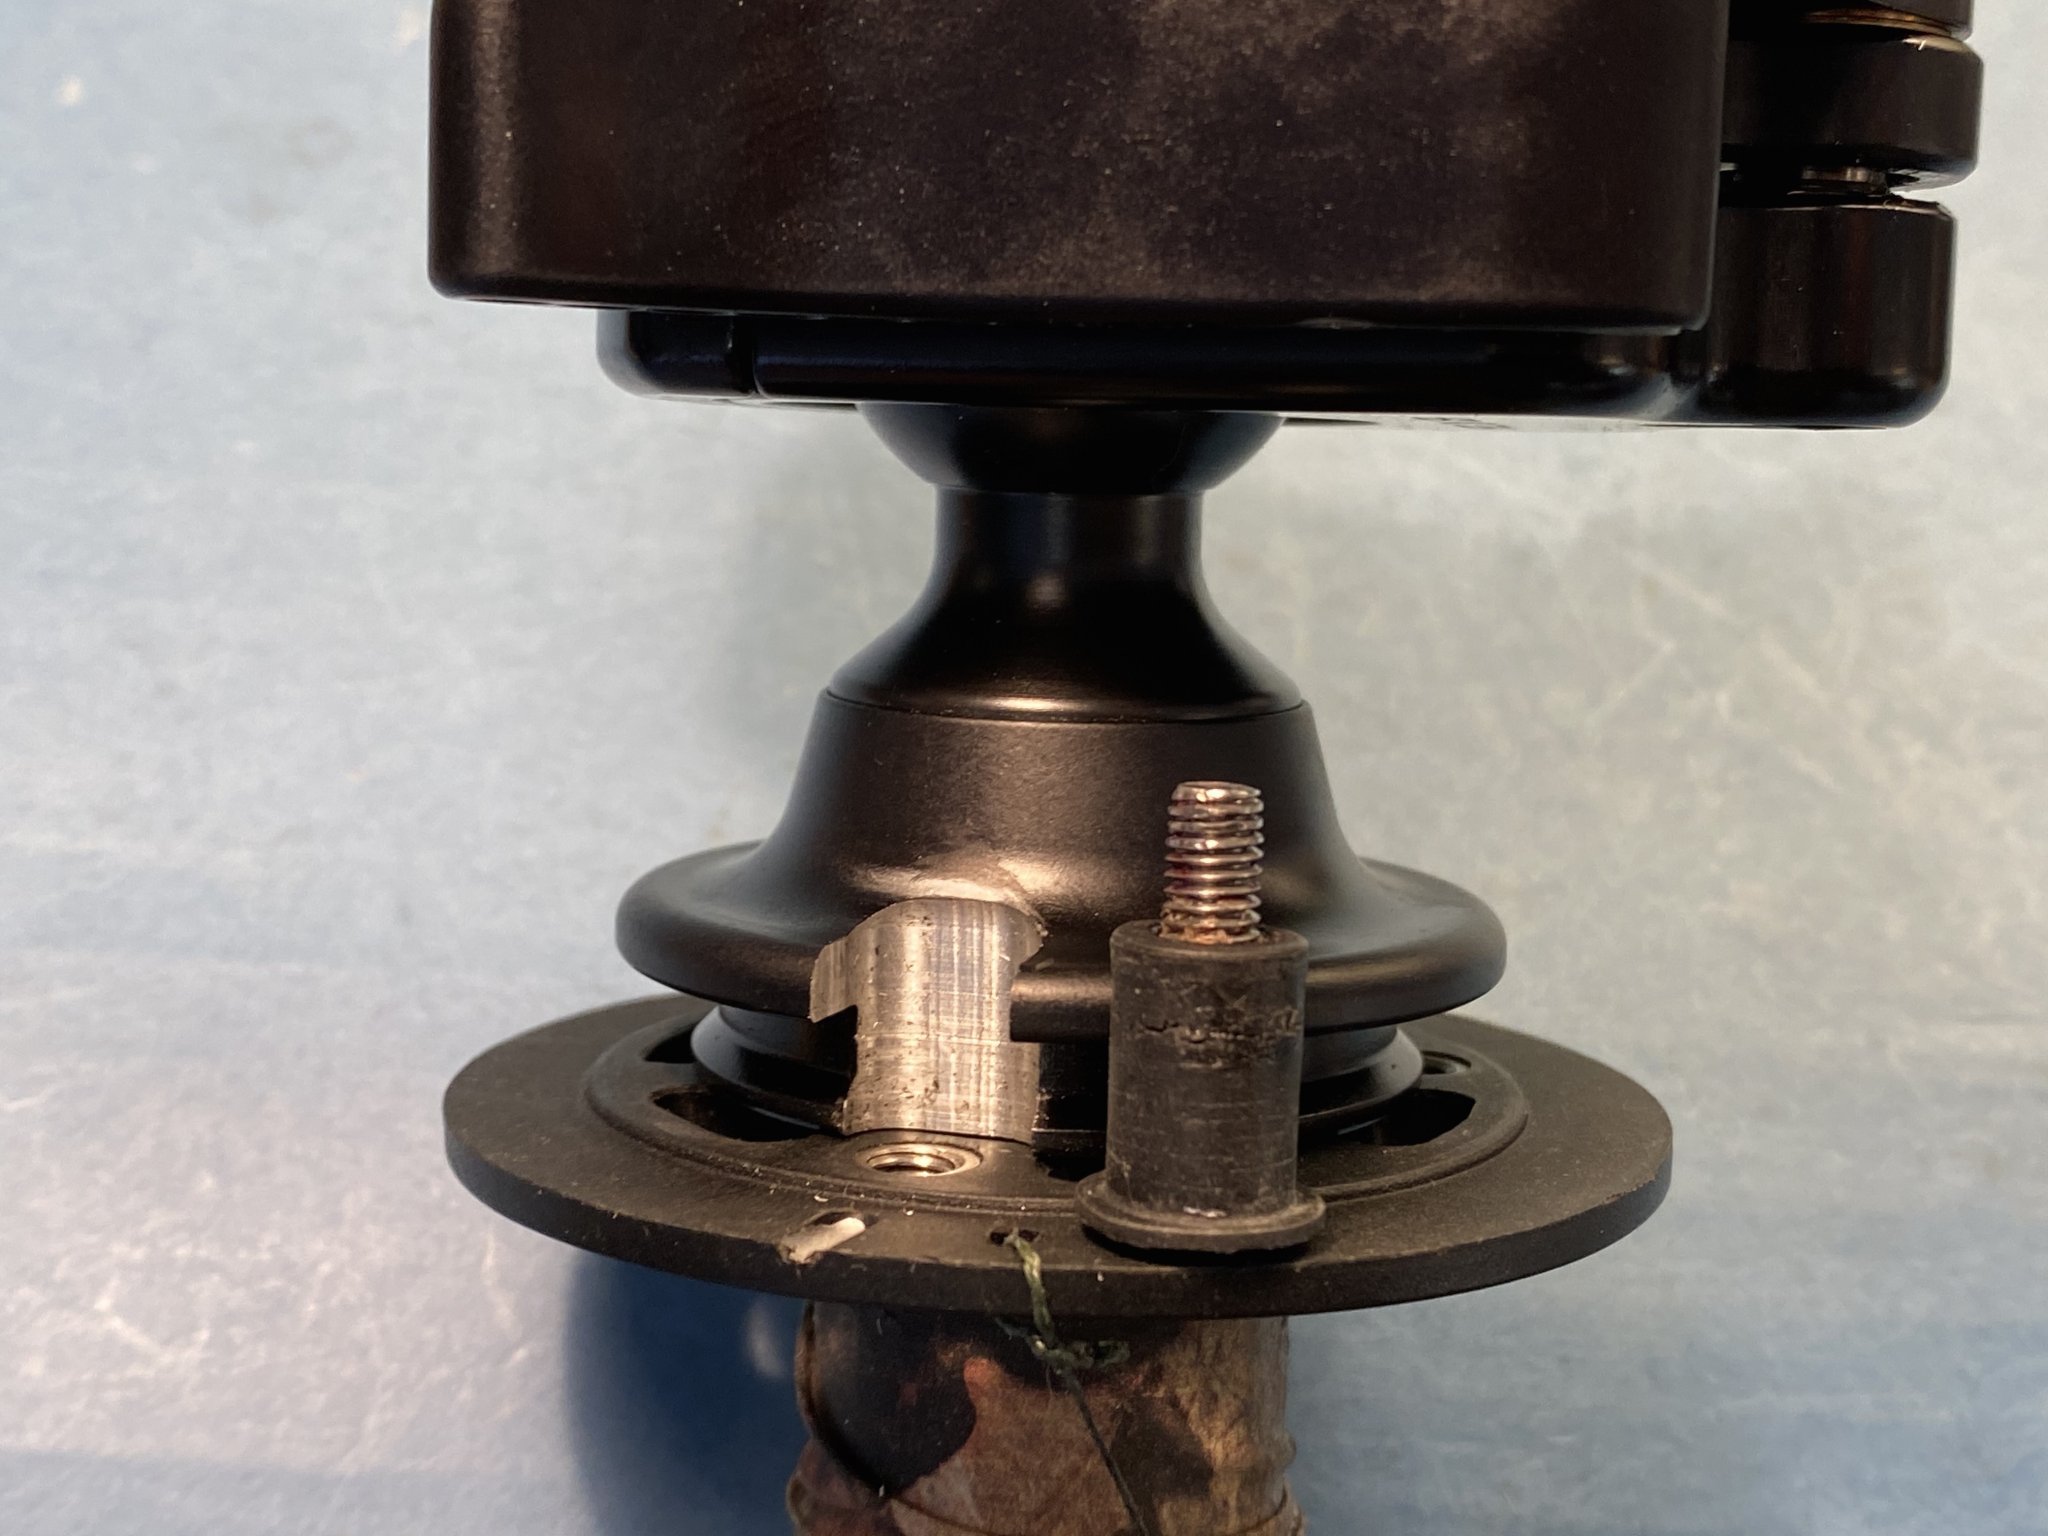 IMG_8605RRS Anvil-30 Adapter 2 Ball End Milled with Indexing Bolt to Swarovski Tripod Center C...jpg